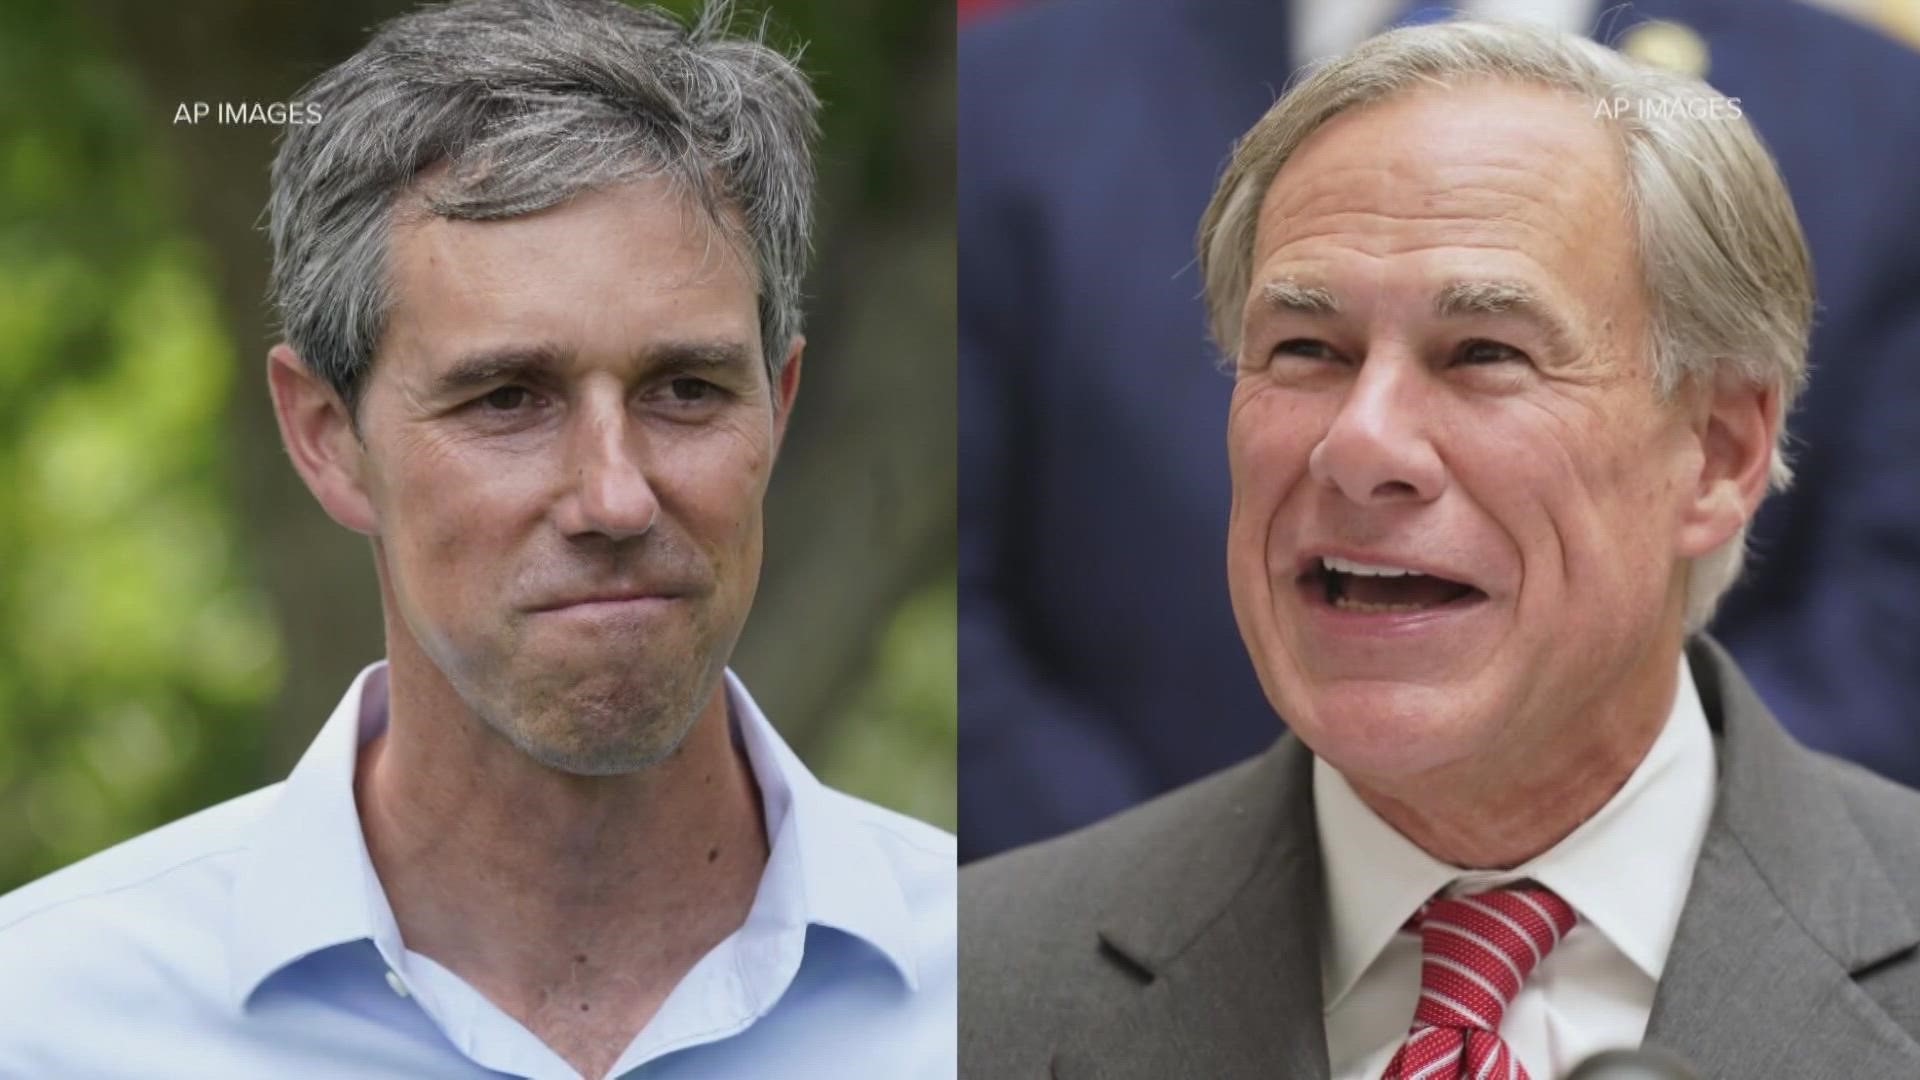 The campaign for Texas governor is heating up, with temperatures rising on Tuesday as Gov. Greg Abbott dropped a new attack ad against opponent Beto O’Rourke.